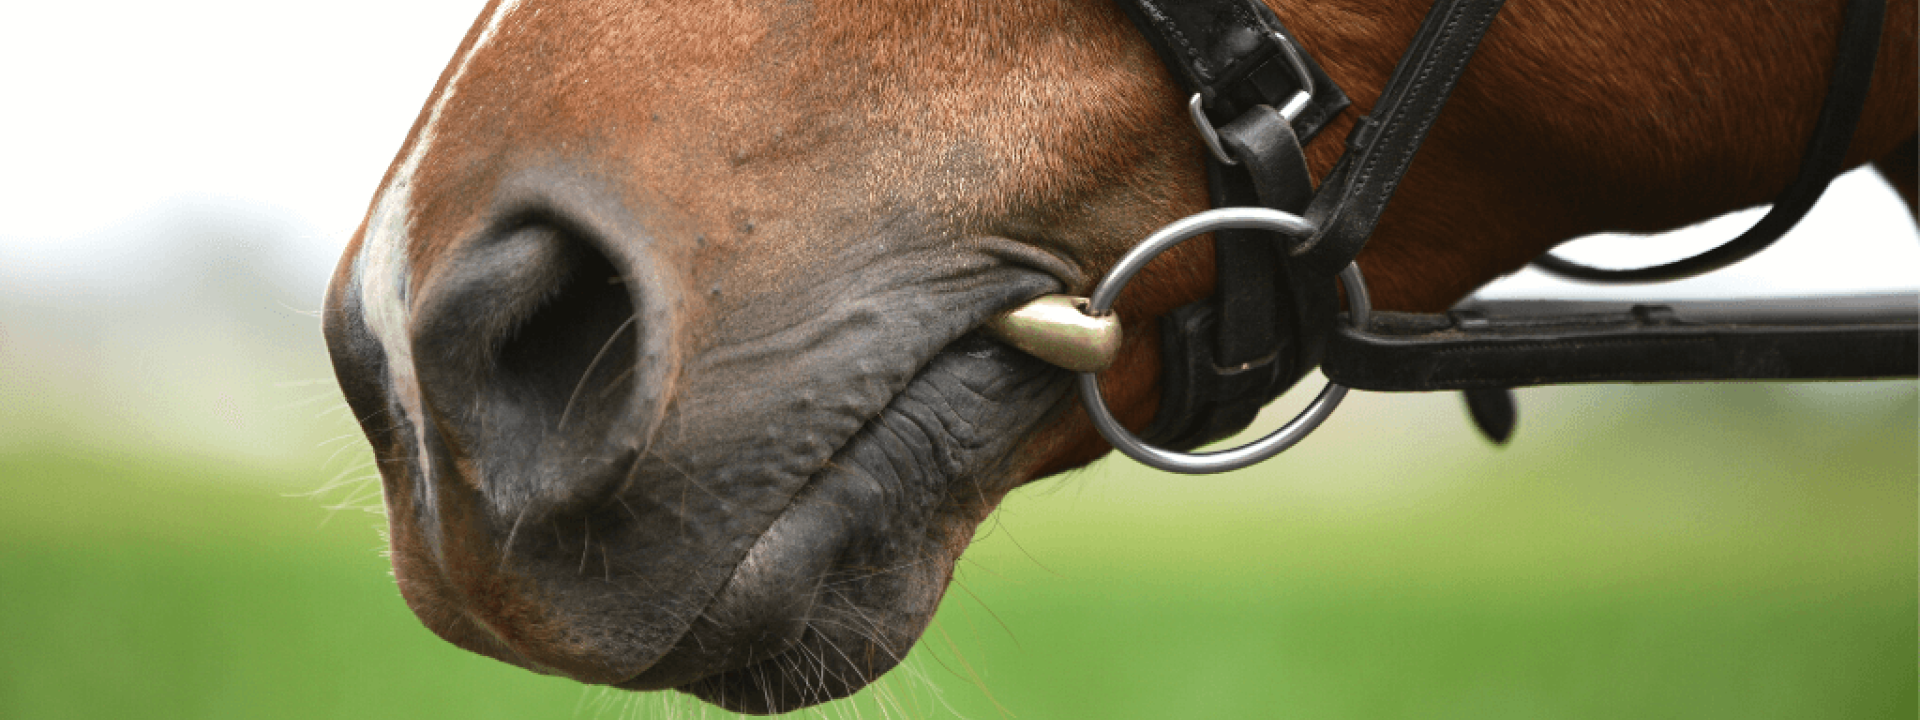 Horse mouth with bridle and bit